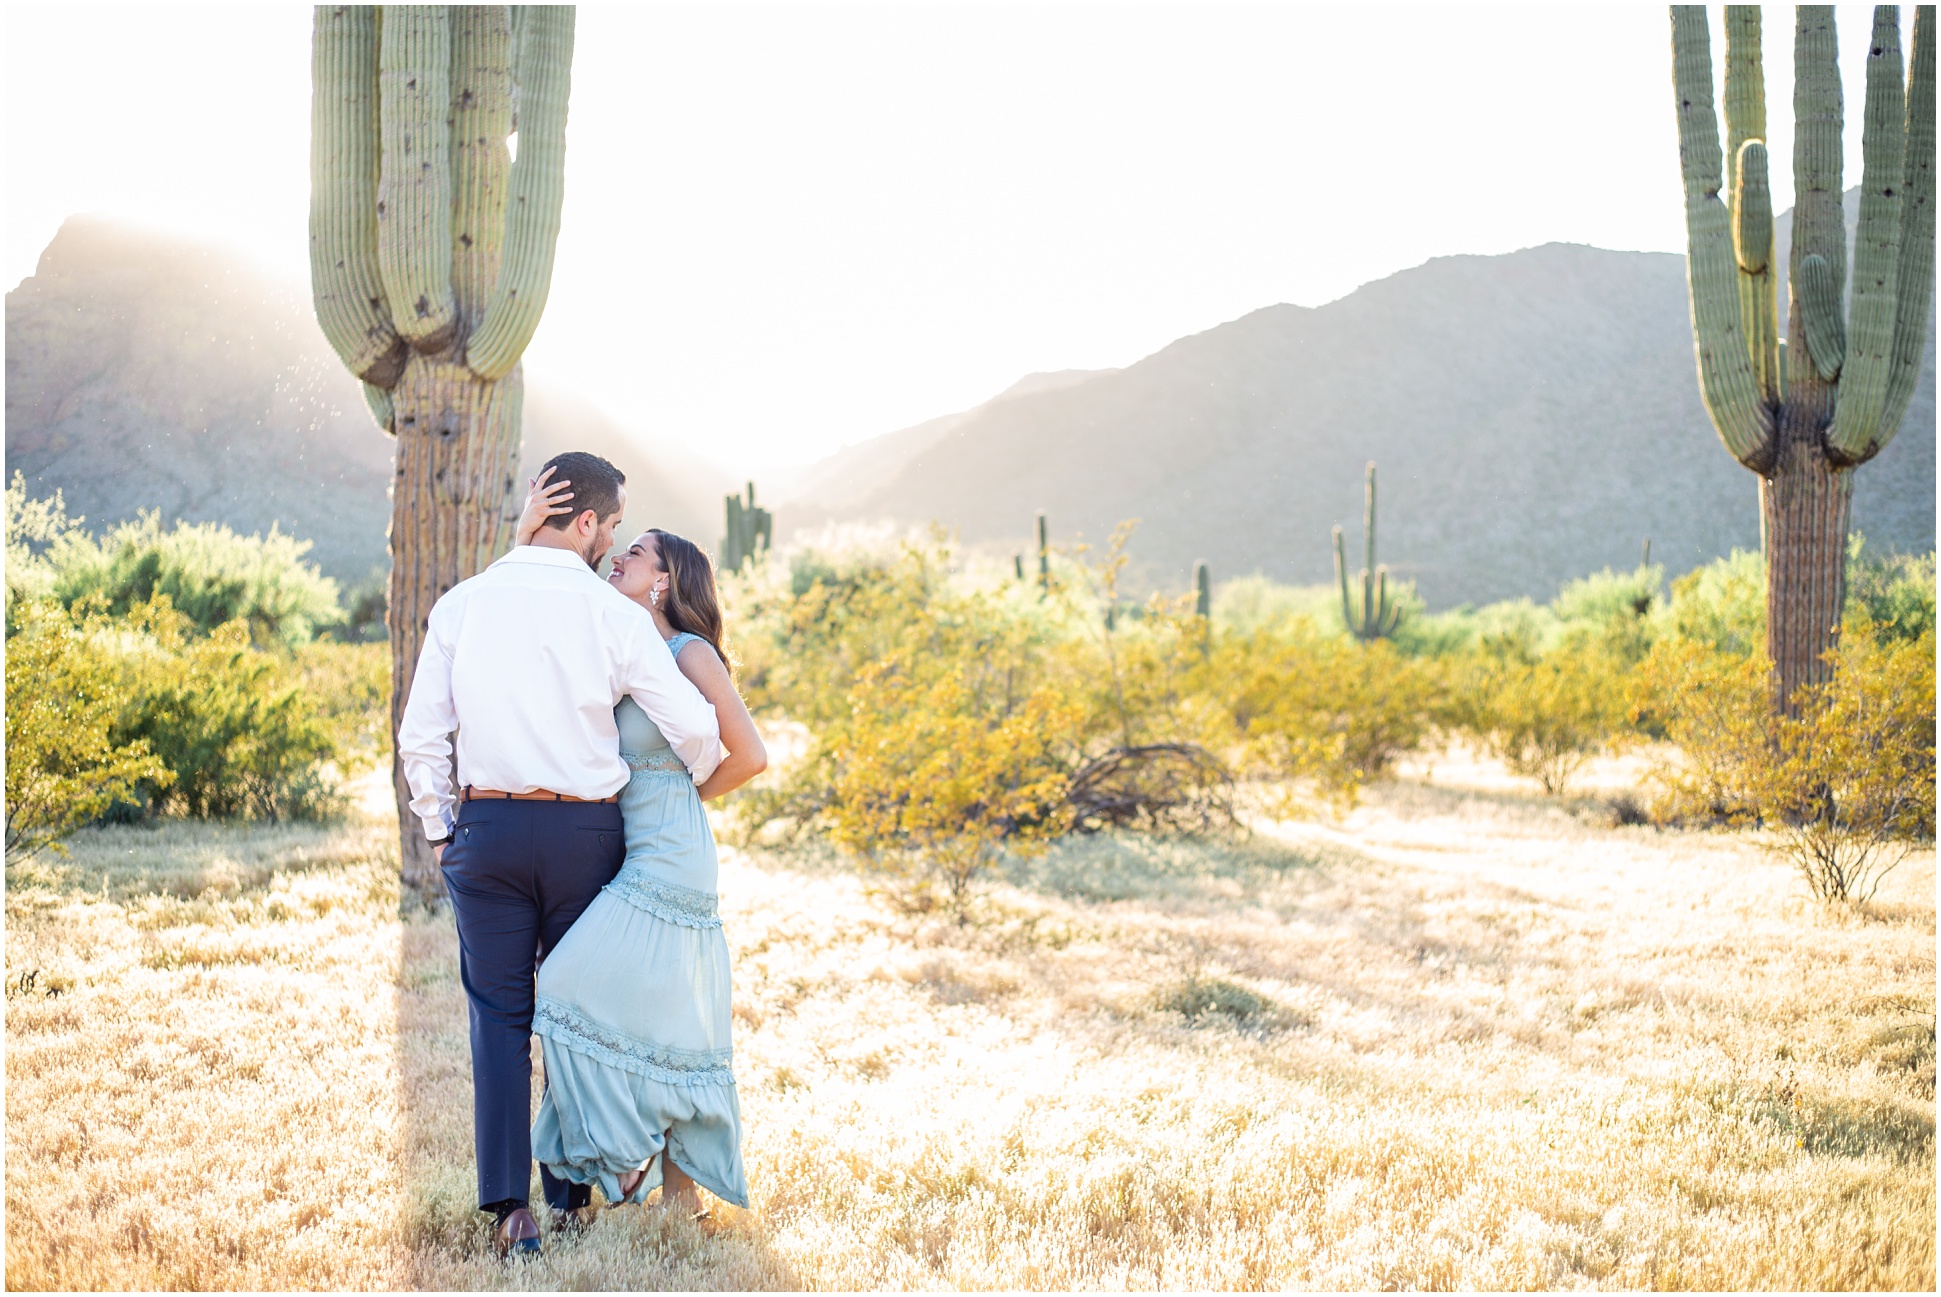 Anette and Paul De La Rosa kissing in the desert in front of a saguaro